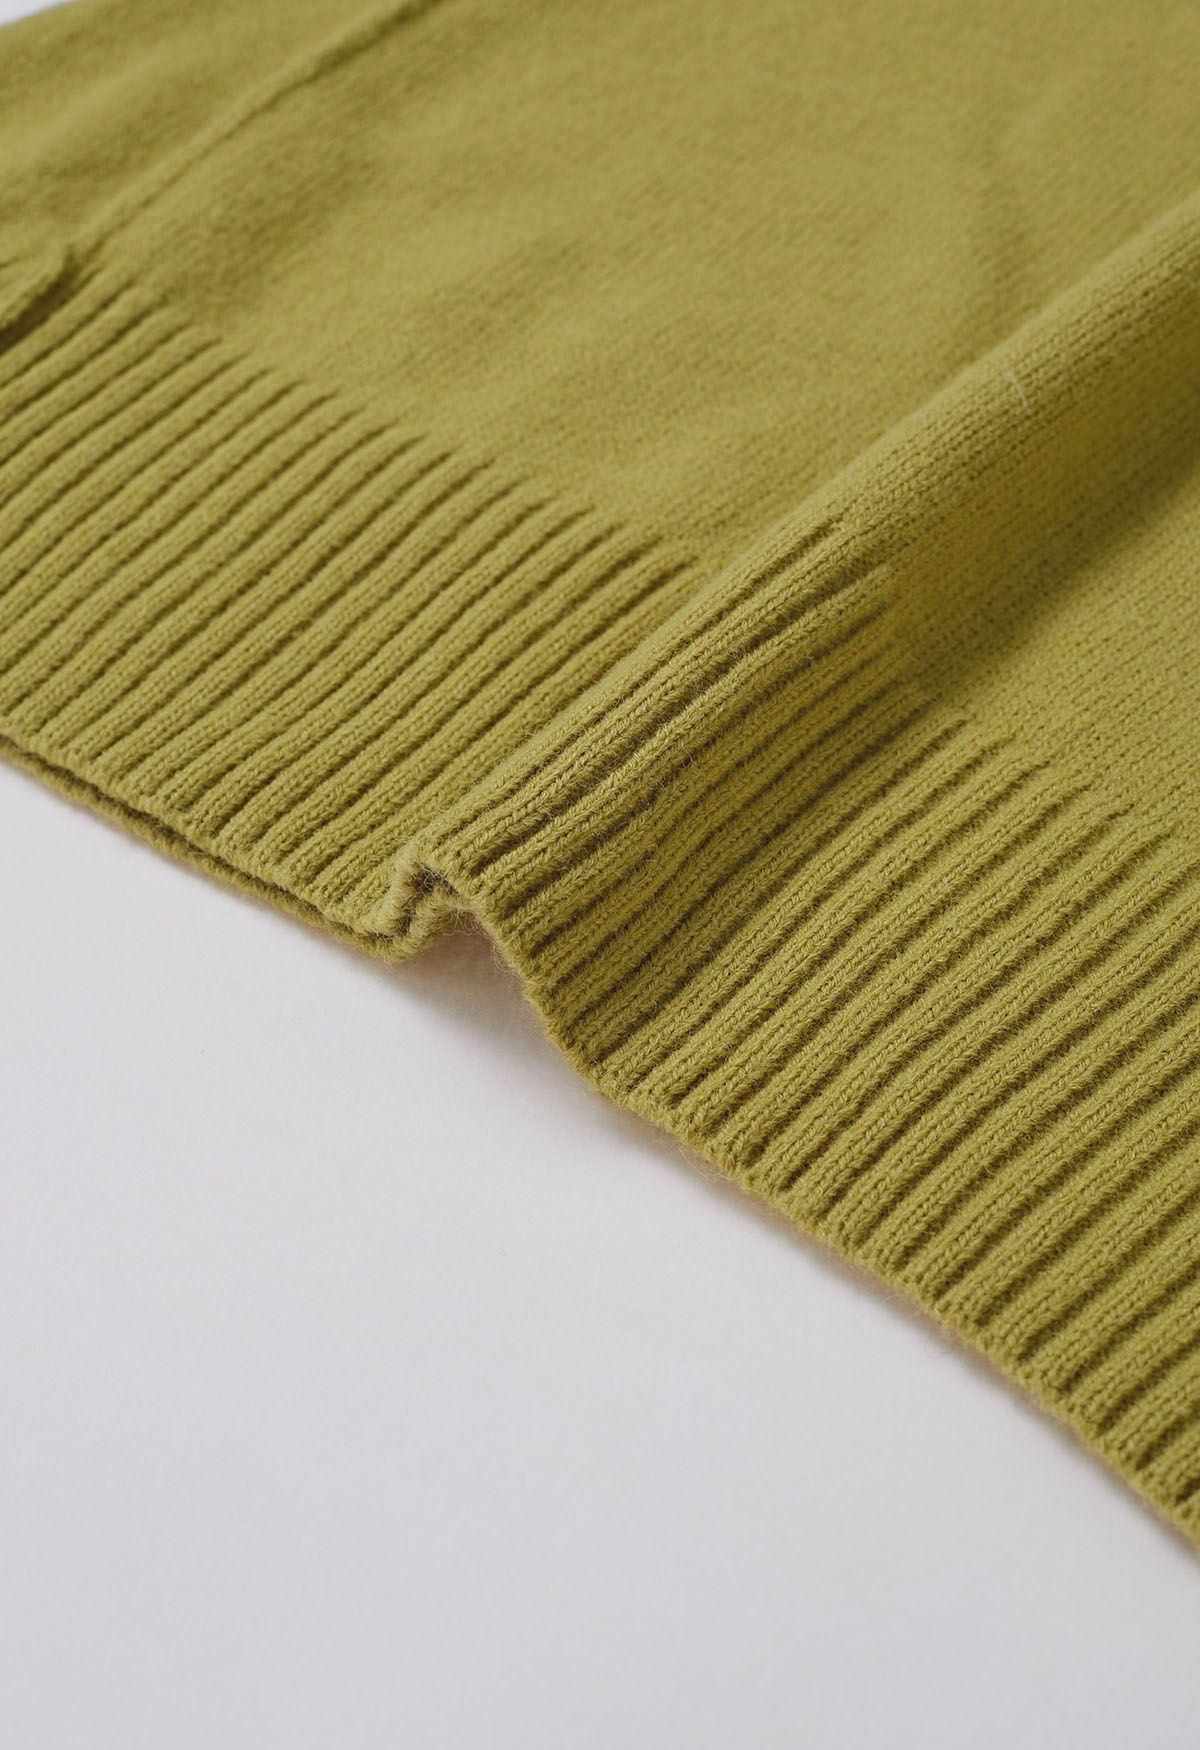 Dropped Shoulder Side Slit Slouchy Knit Sweater in Lime